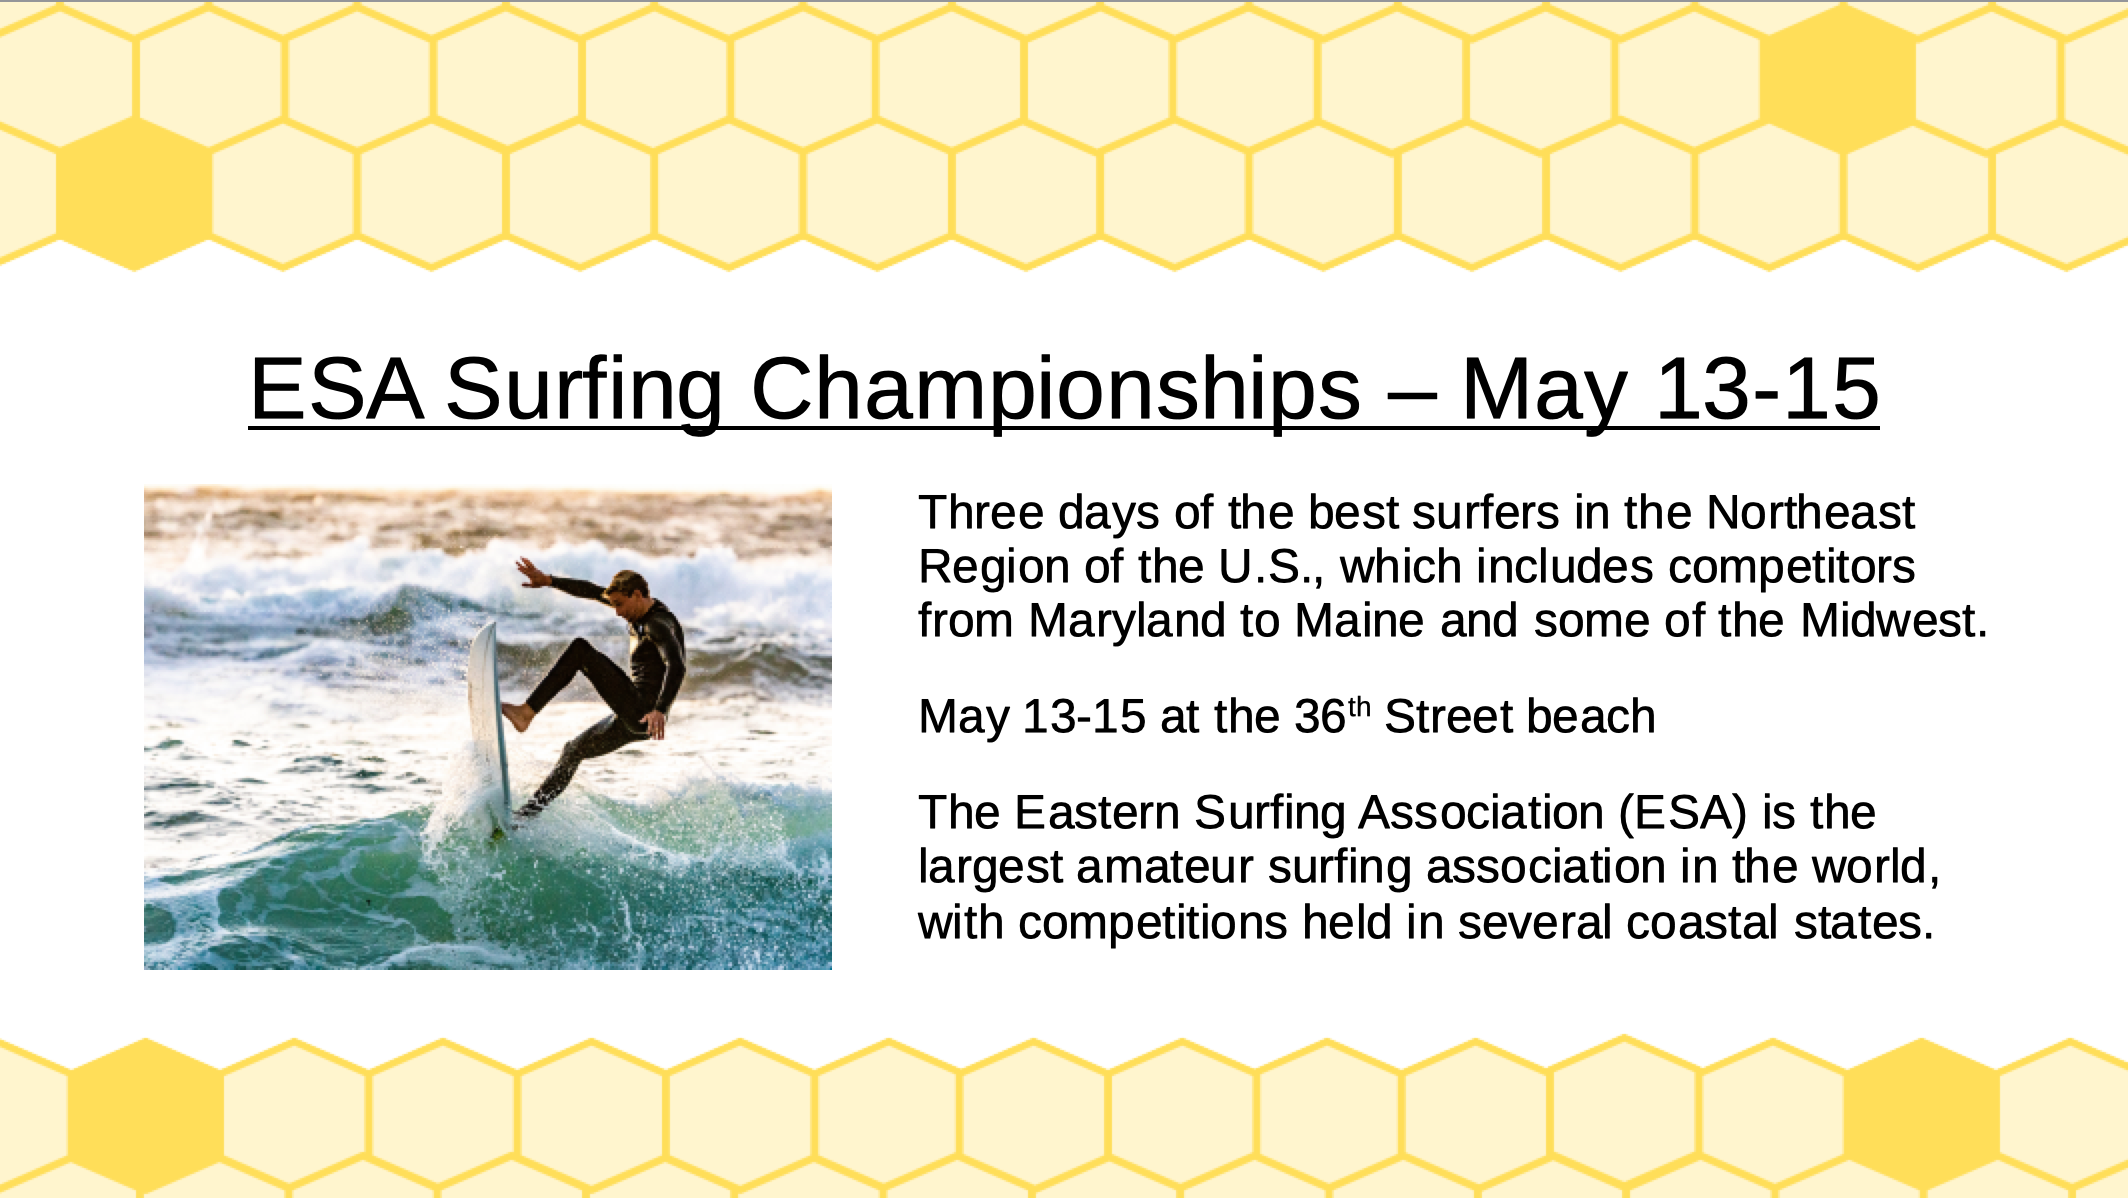 ESA Surfing Championships Preview Tile